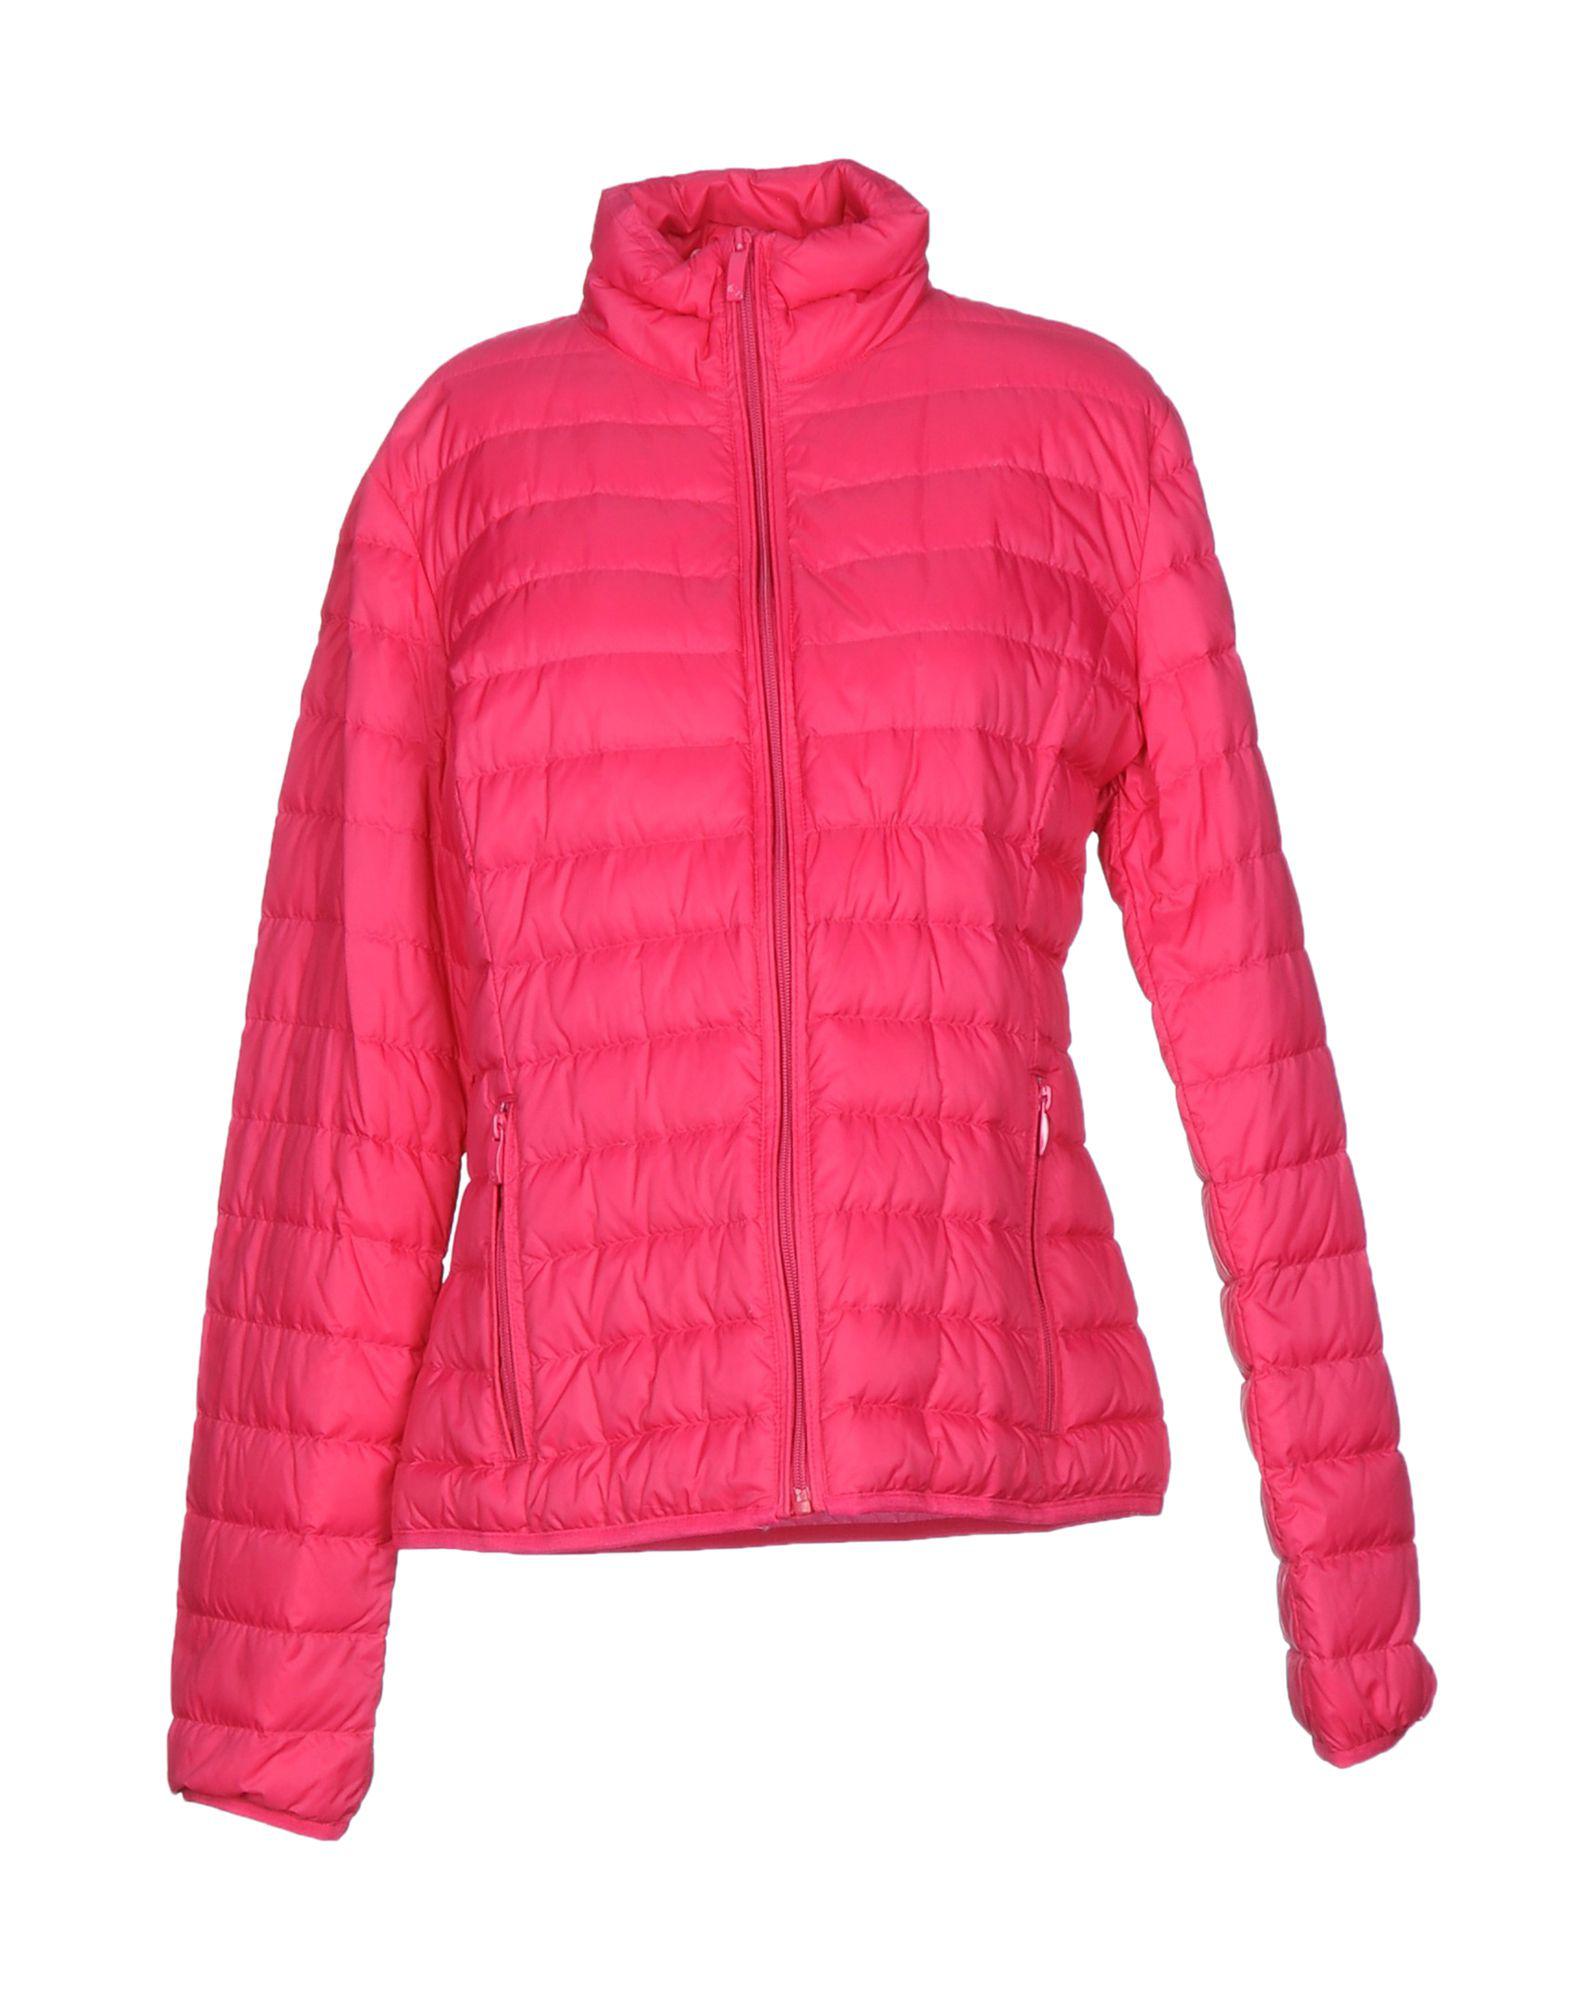 Armani Jeans Synthetic Down Jacket in Fuchsia (Pink) - Lyst